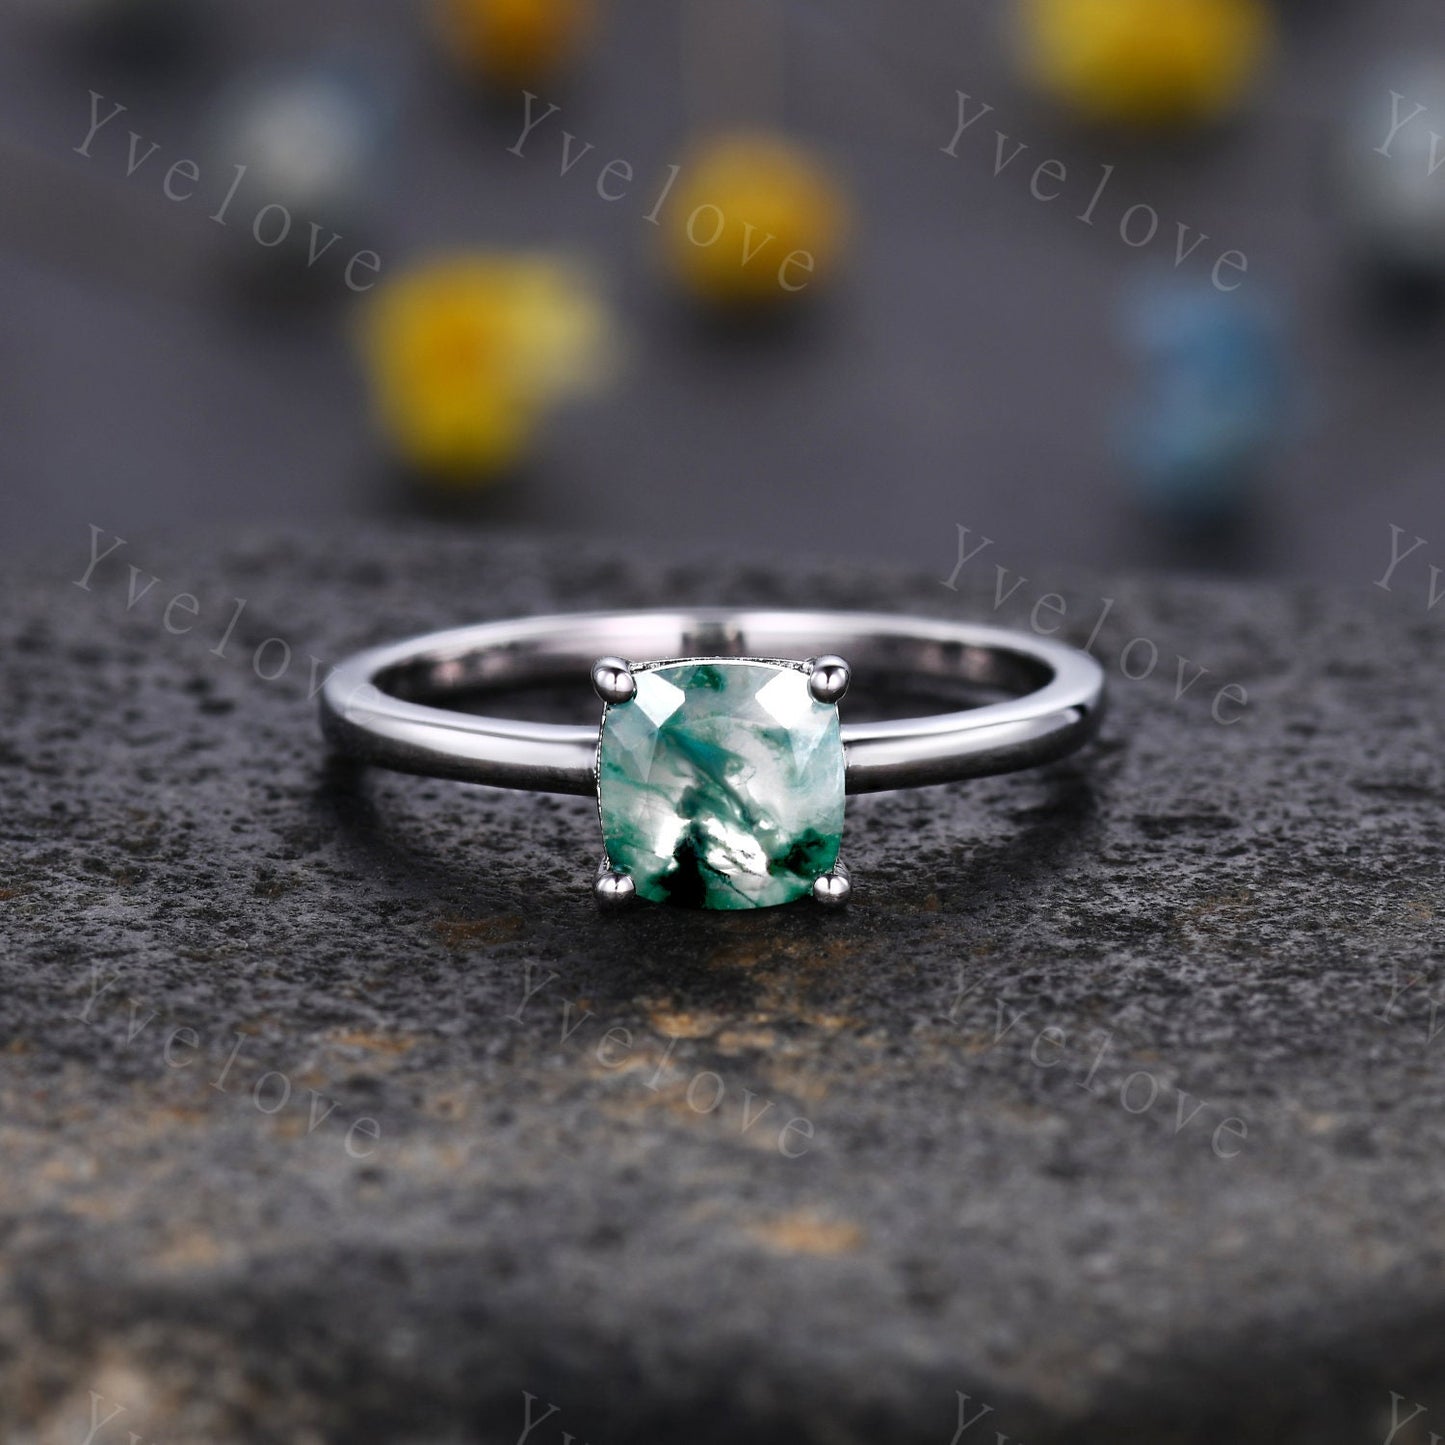 Moss agate engagement ring,Green agate ring,Moss agate ring,Cushion cut moss agate ring,Platinum ring,Silver ring,Solitaire ring,Customized